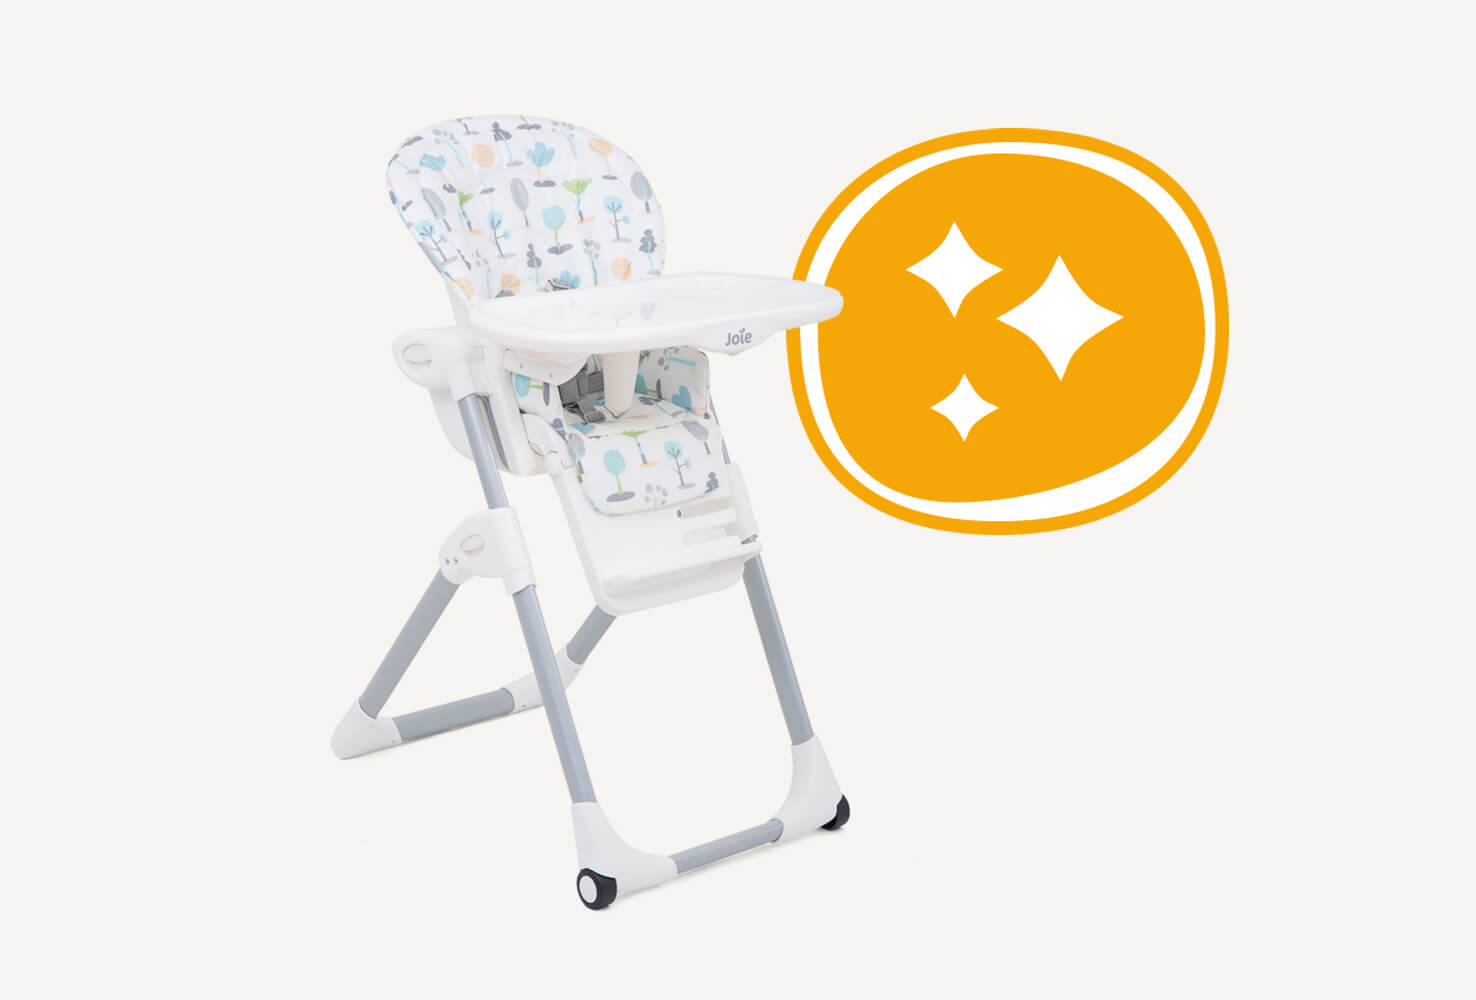  The Joie mimzy highchair in a multi-color print featuring illustrations of different trees from a right angle view beside an illustration of an orange circle with three white star shapes inside.